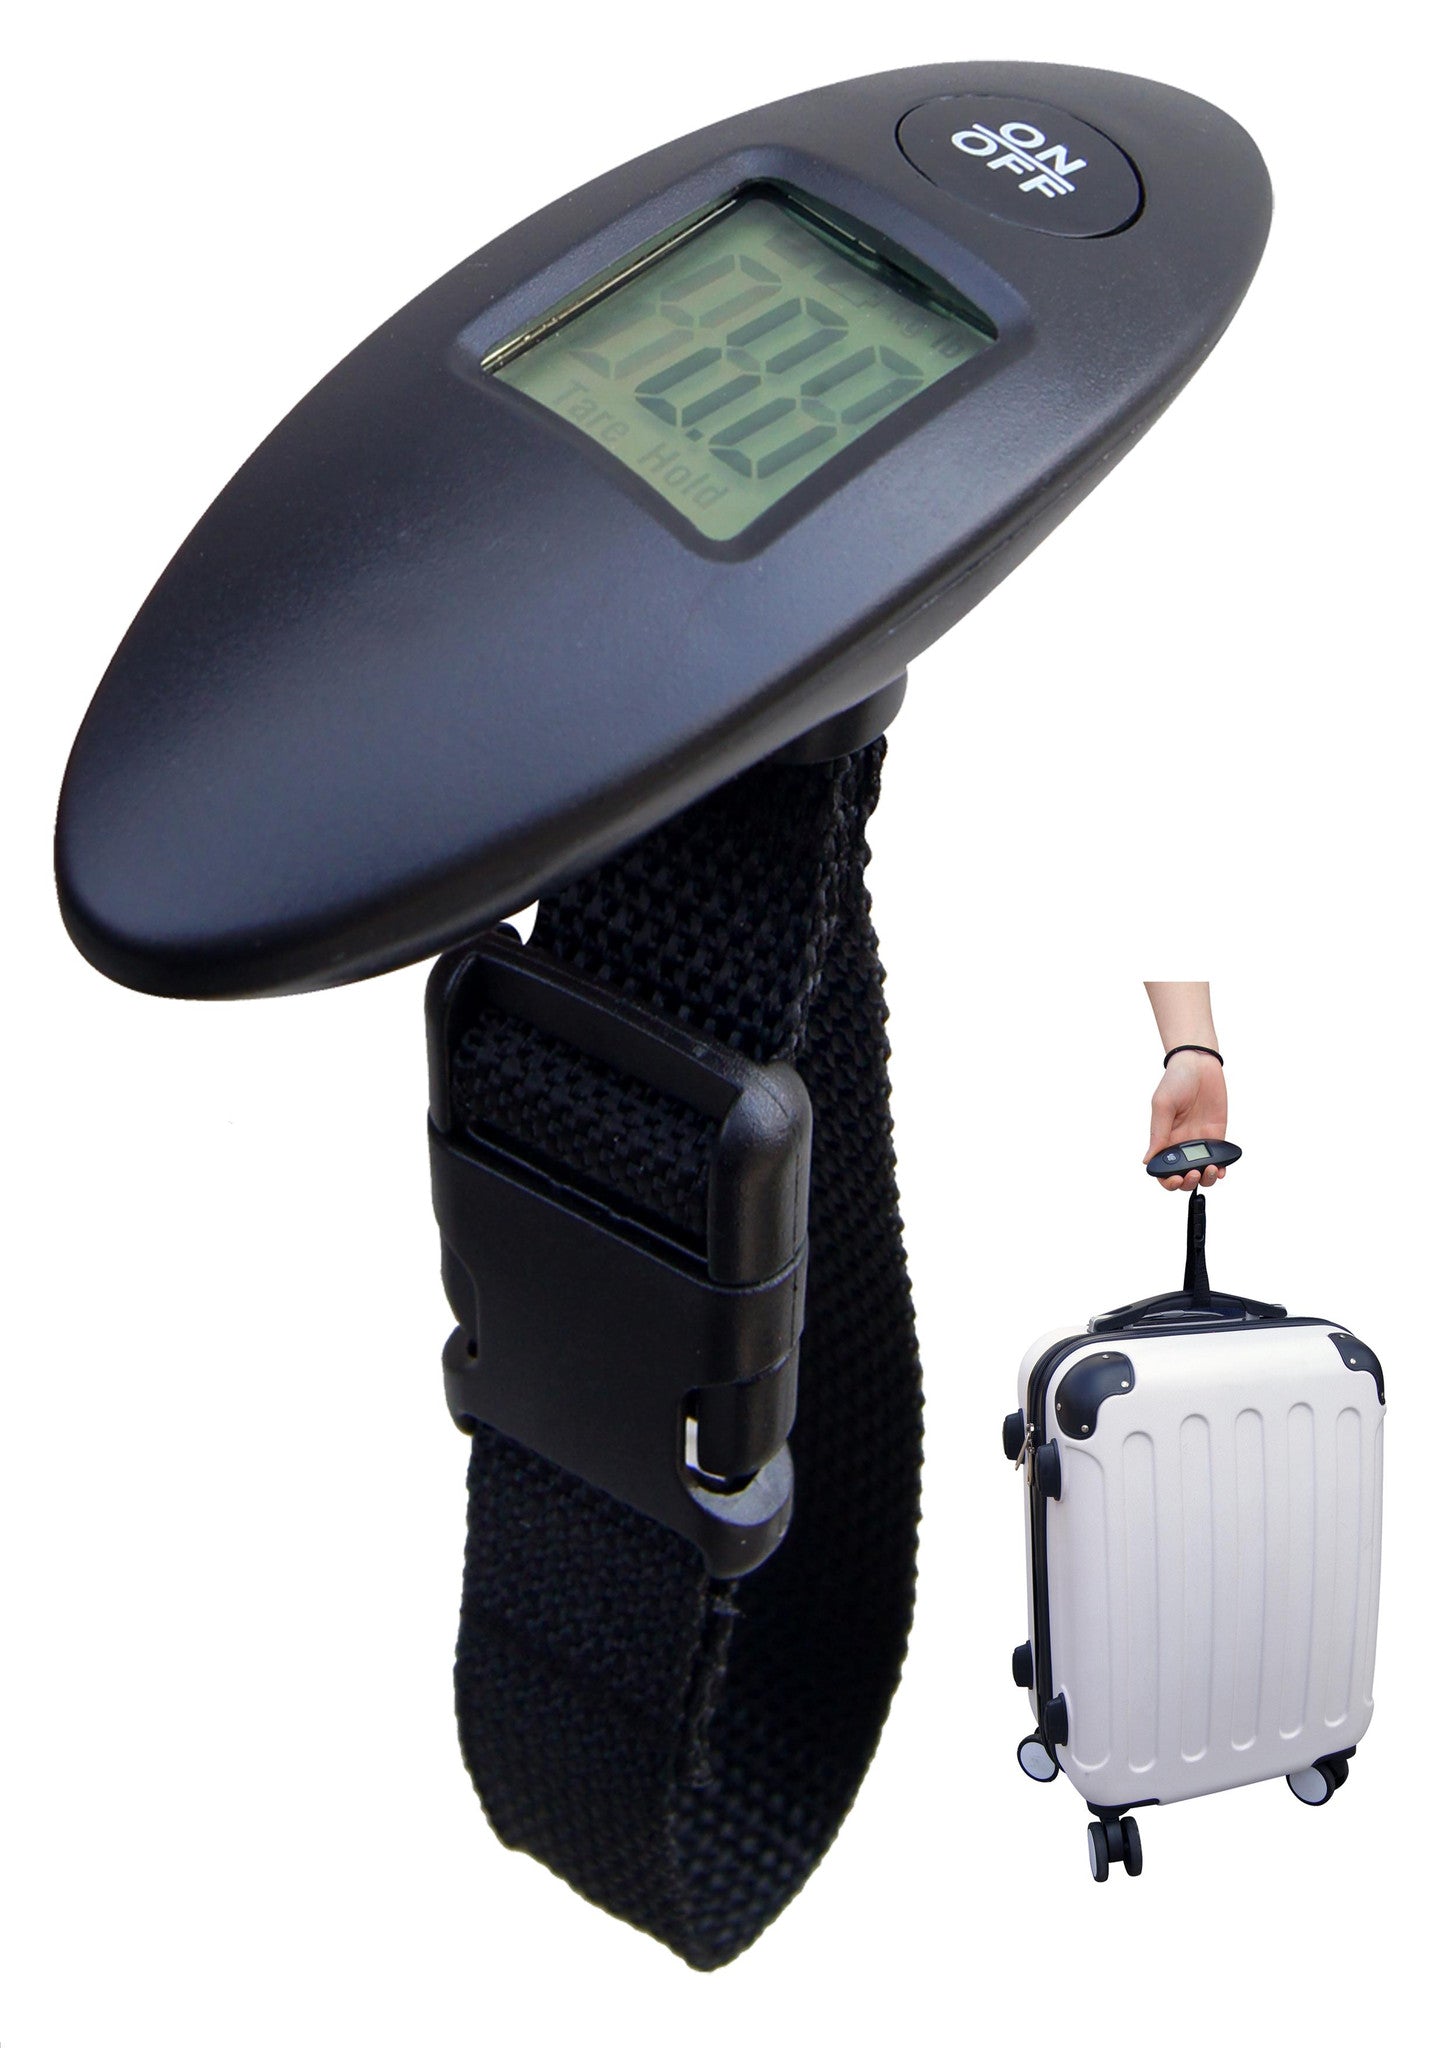 Black digital luggage scale with memory function, Travel - Presence